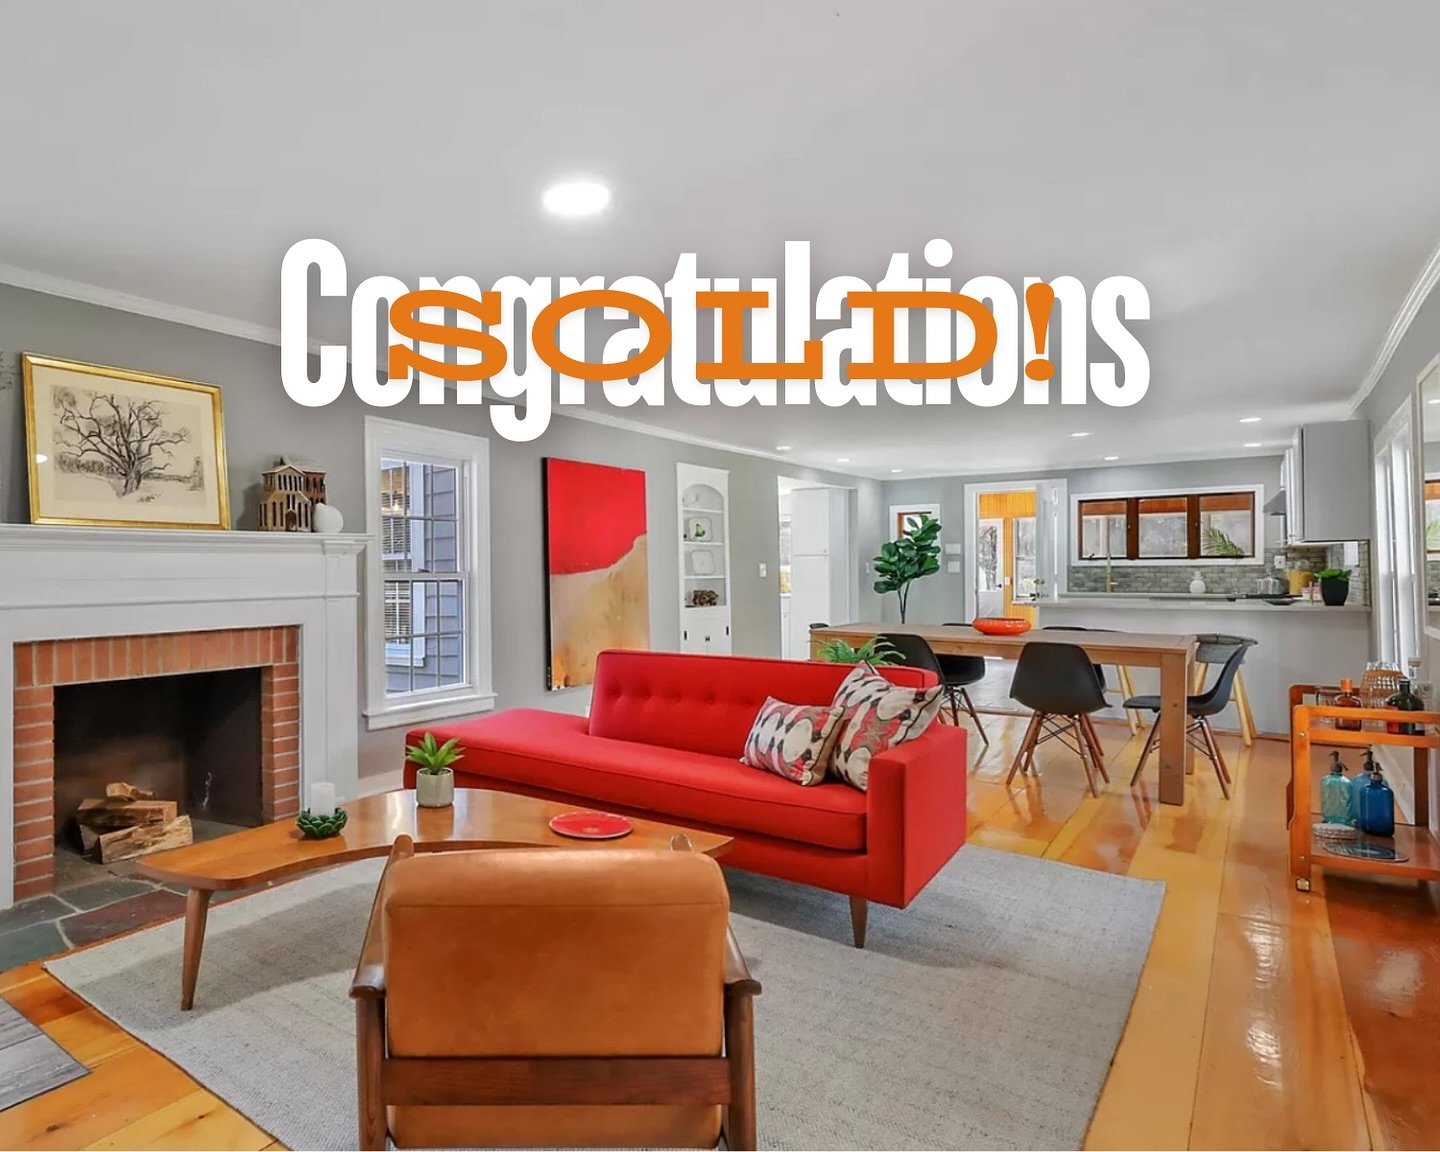 🎉 Congratulations to the buyers, sellers, and realtors on the sale of this New Marlborough home. On to the next! 💃🏻 @&zwnj;nocherrealty #everyhomeshouldtellastory
#homestagingworks #homestaging #intheberkshires #theberkshires #womanownedbusiness